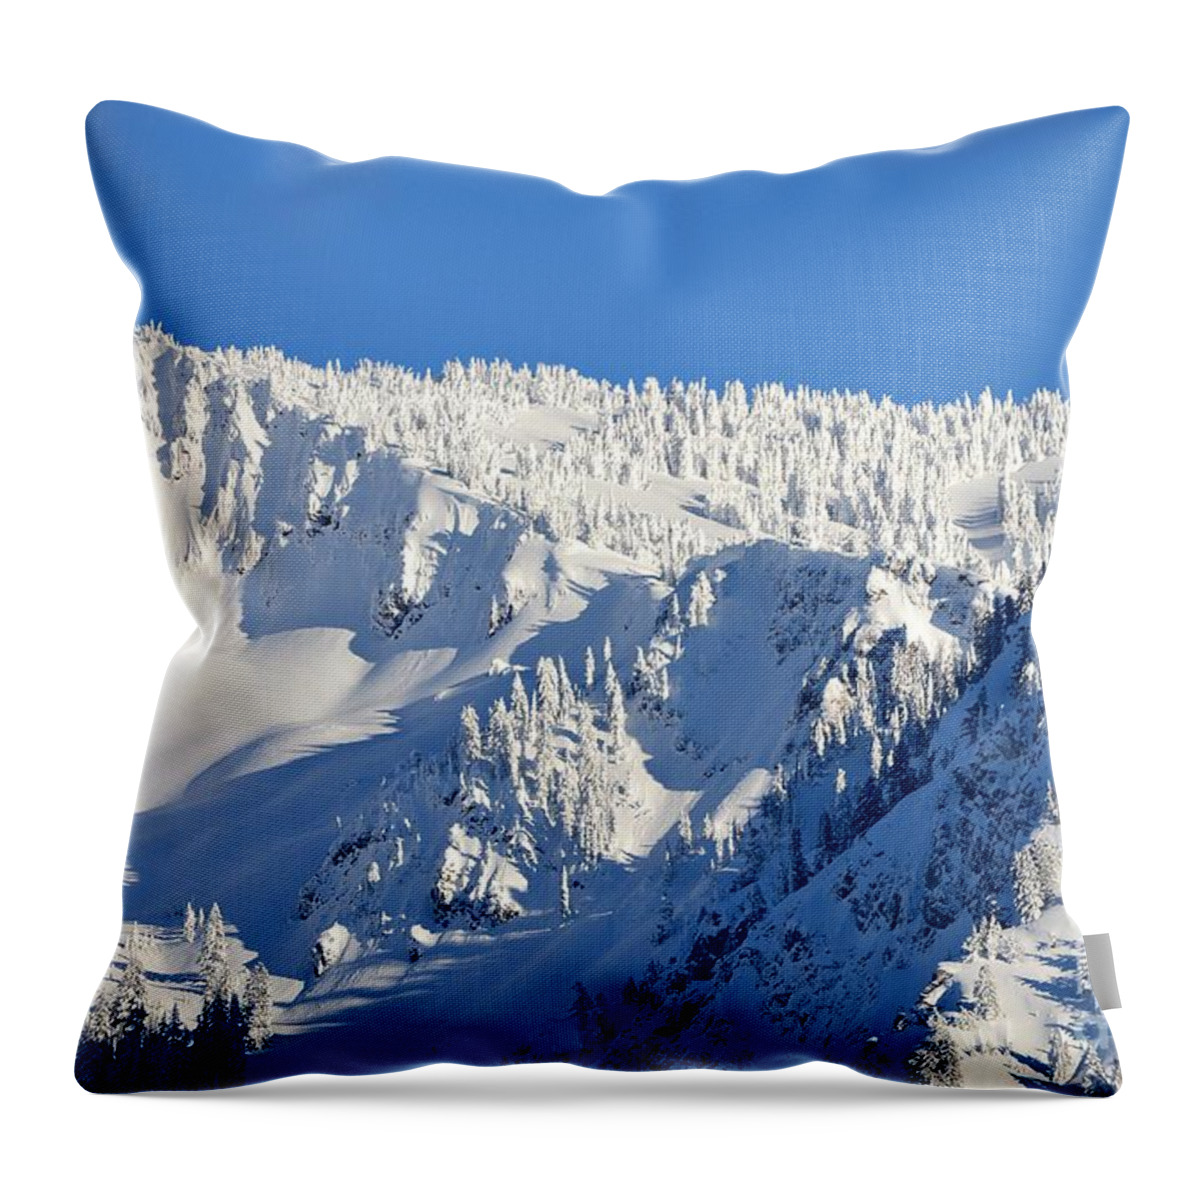 Snow Throw Pillow featuring the photograph Winter by Dorrene BrownButterfield